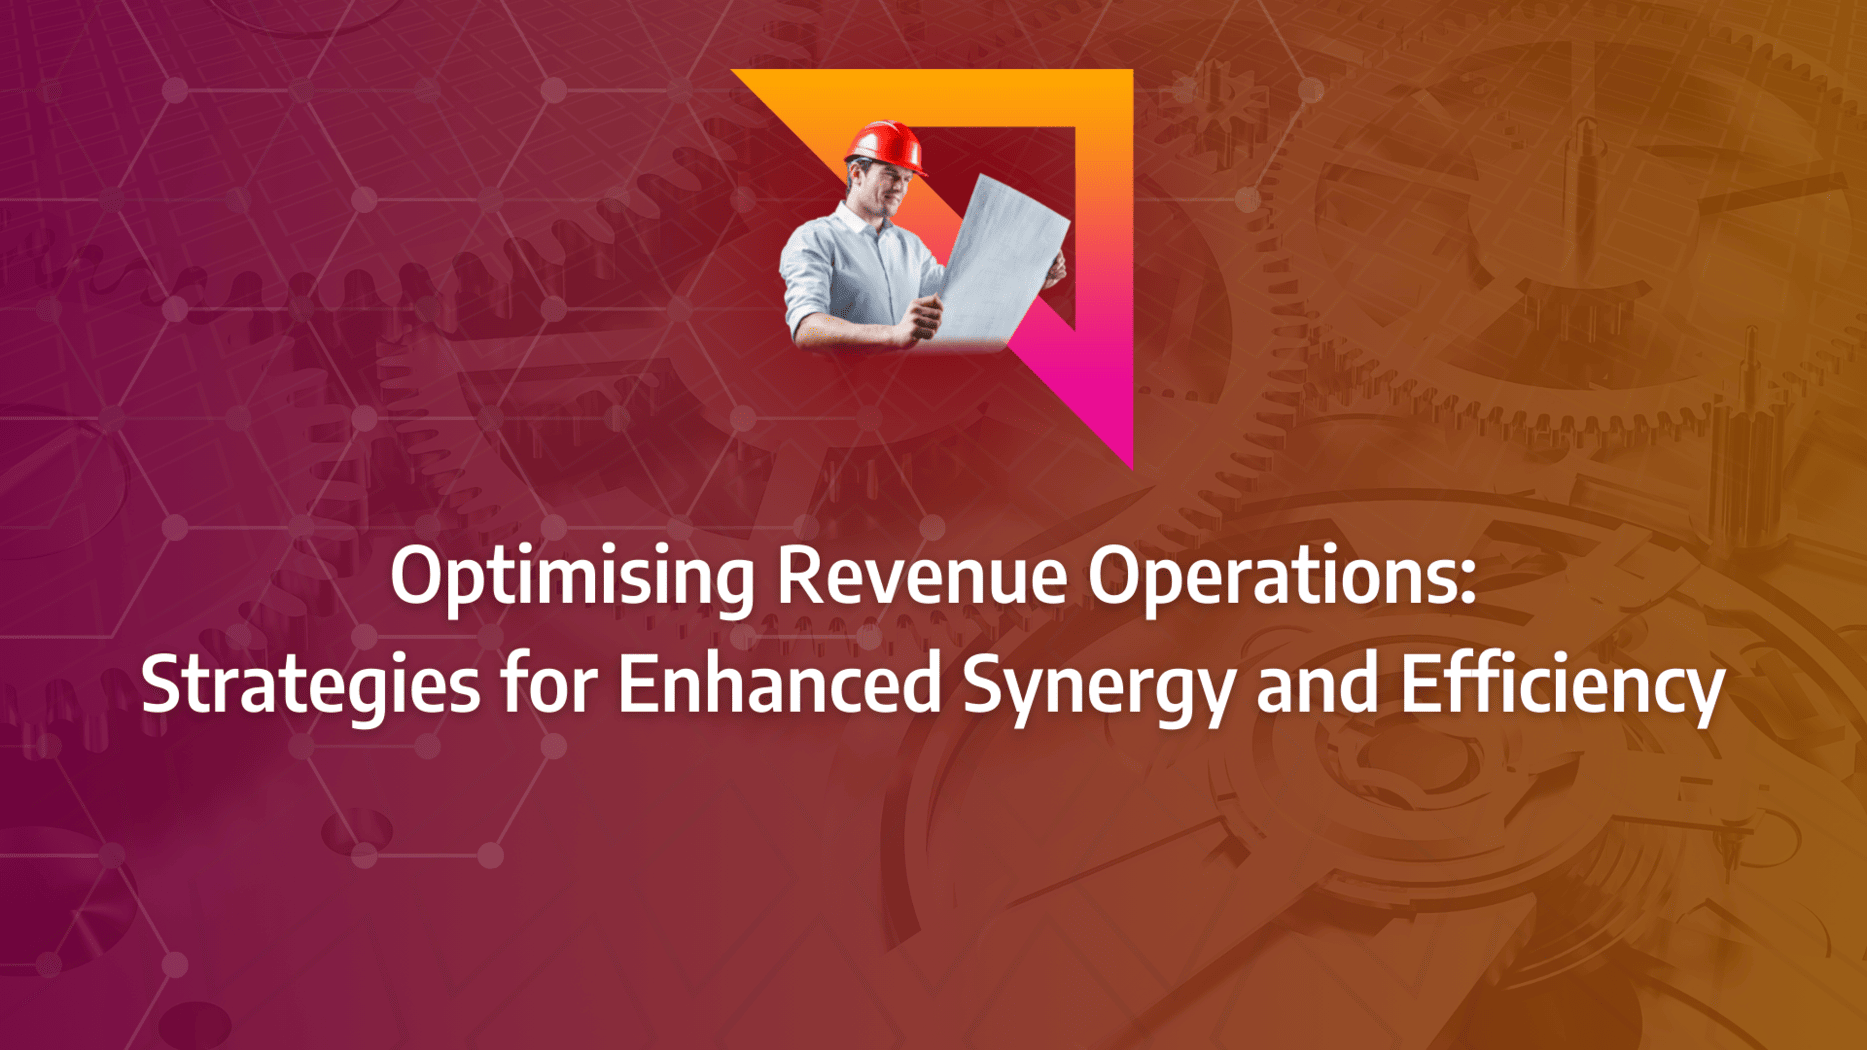 Revenue operations: achieving organisational synergy and efficiency through integrated revenue operations tools, tech stack alignment, platform utilisation, and clearly defined responsibilities.: strategy framework diagram for revenue operations responsibilities, revenue operations tools, revenue operations tech stack. revenue operations platforms